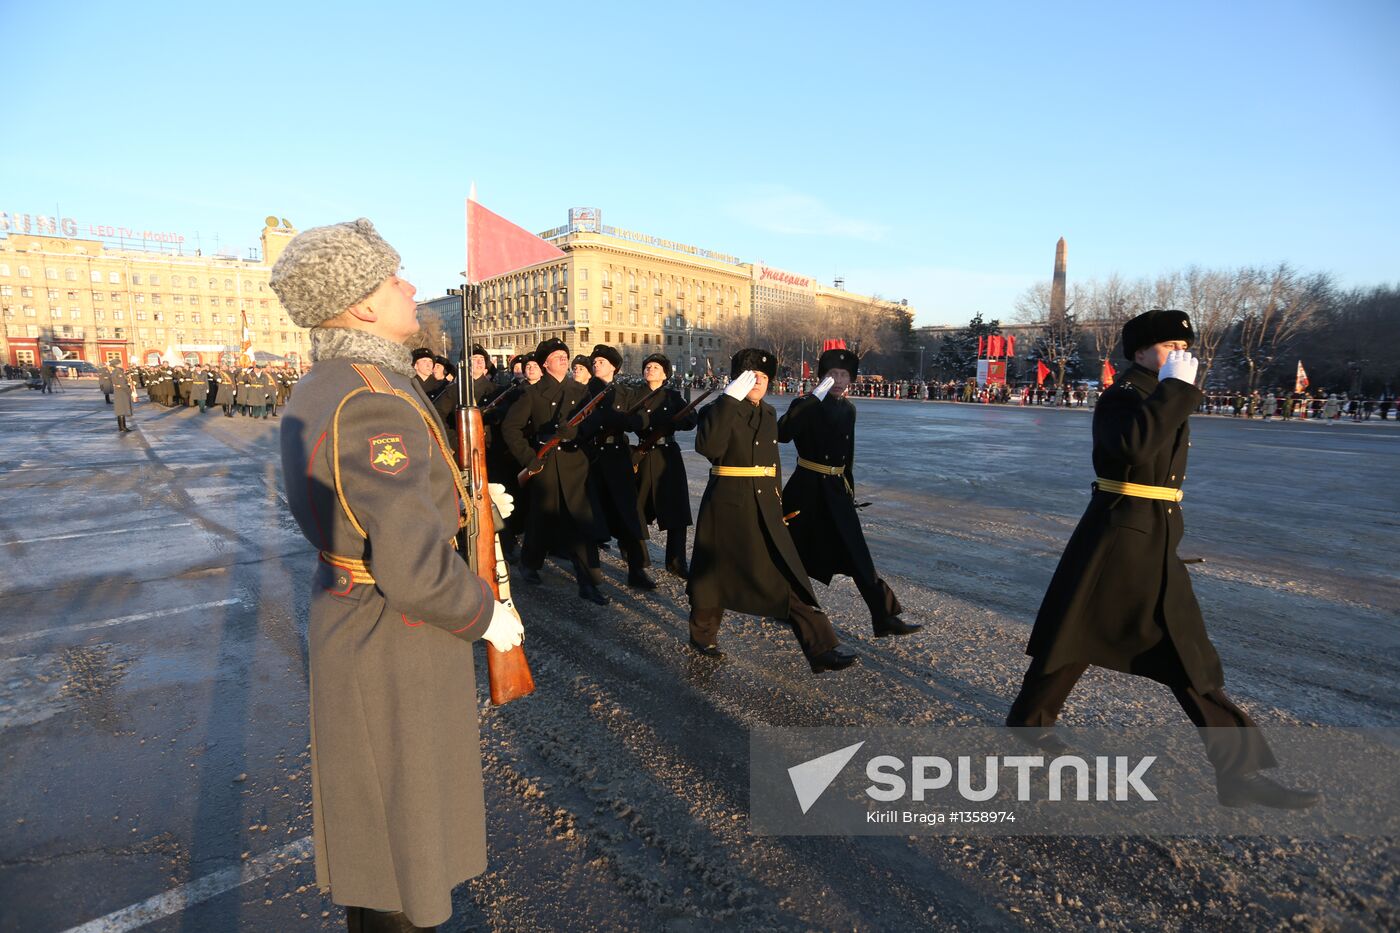 Parade rehearsal for 70th anniversary of Battle of Stalingrad